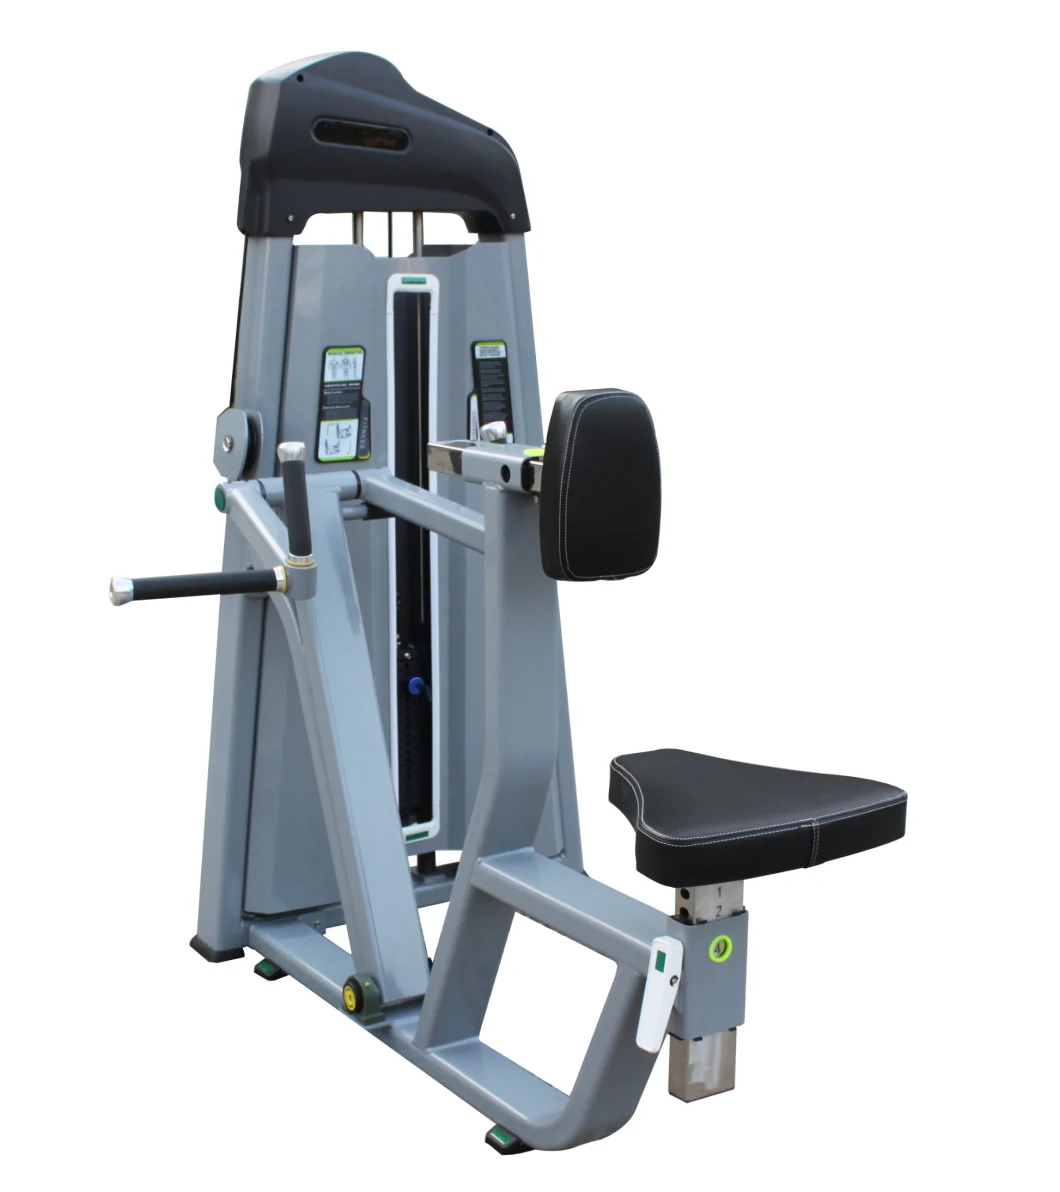 Best Selling Factory/Manufacturer Direct Sale Gym/Fitness Equipment Vertical Row with Ce Approved (AXD5034)